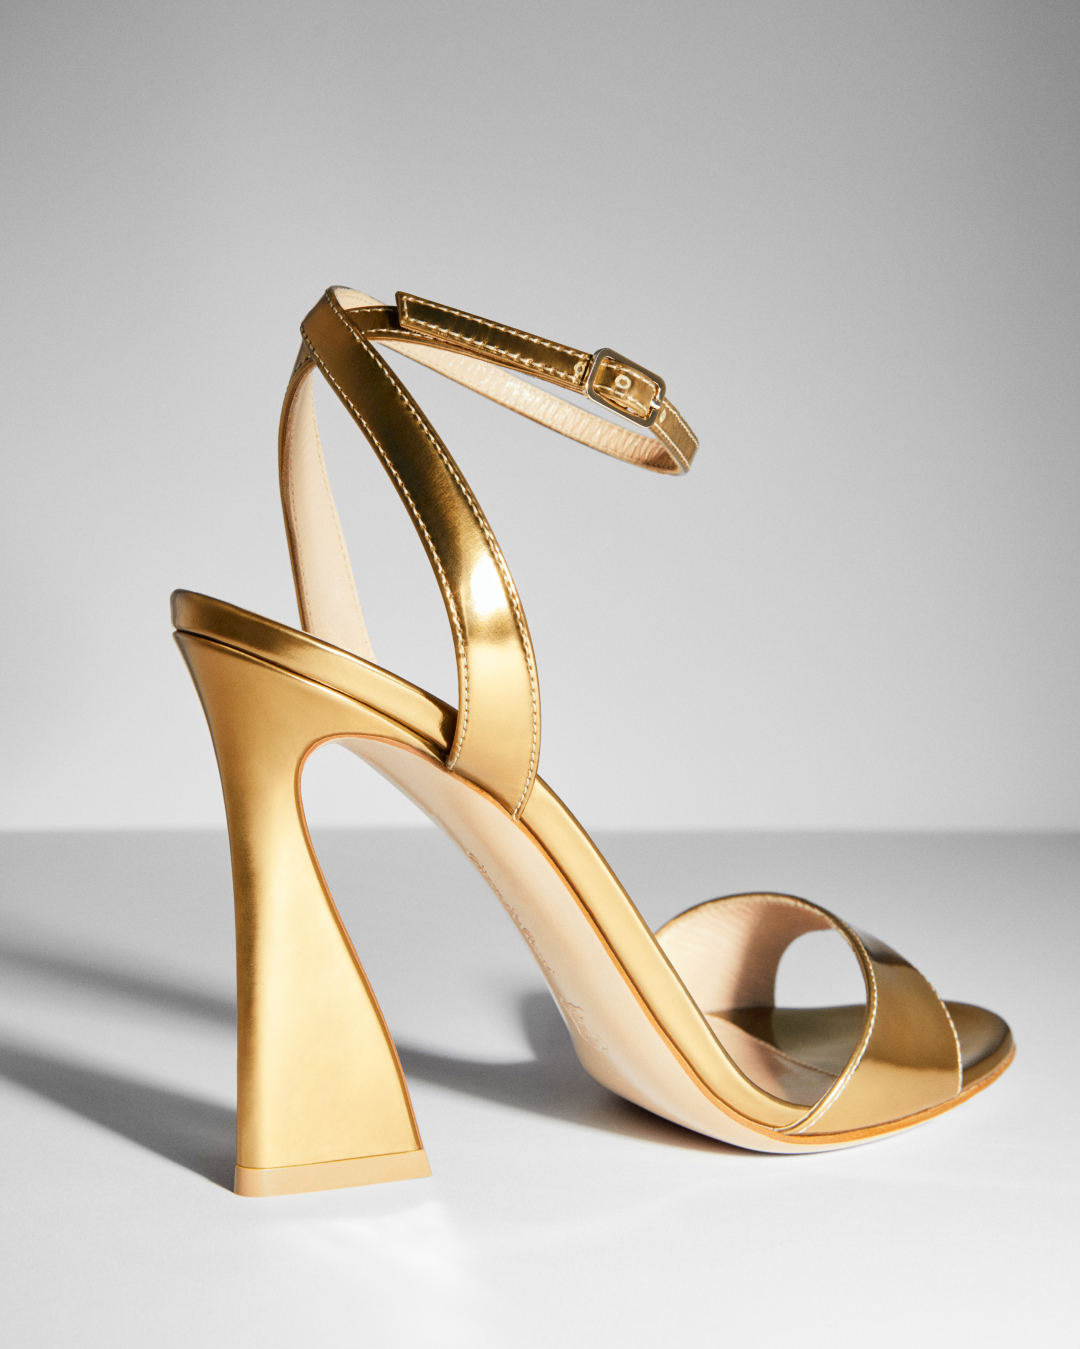 Gianvito Rossi - True to its name, the sculpted Aura sandal in gold has a unique glow.
#GianvitoRossi 
#GianvitoSandals
#GianvitoFW20